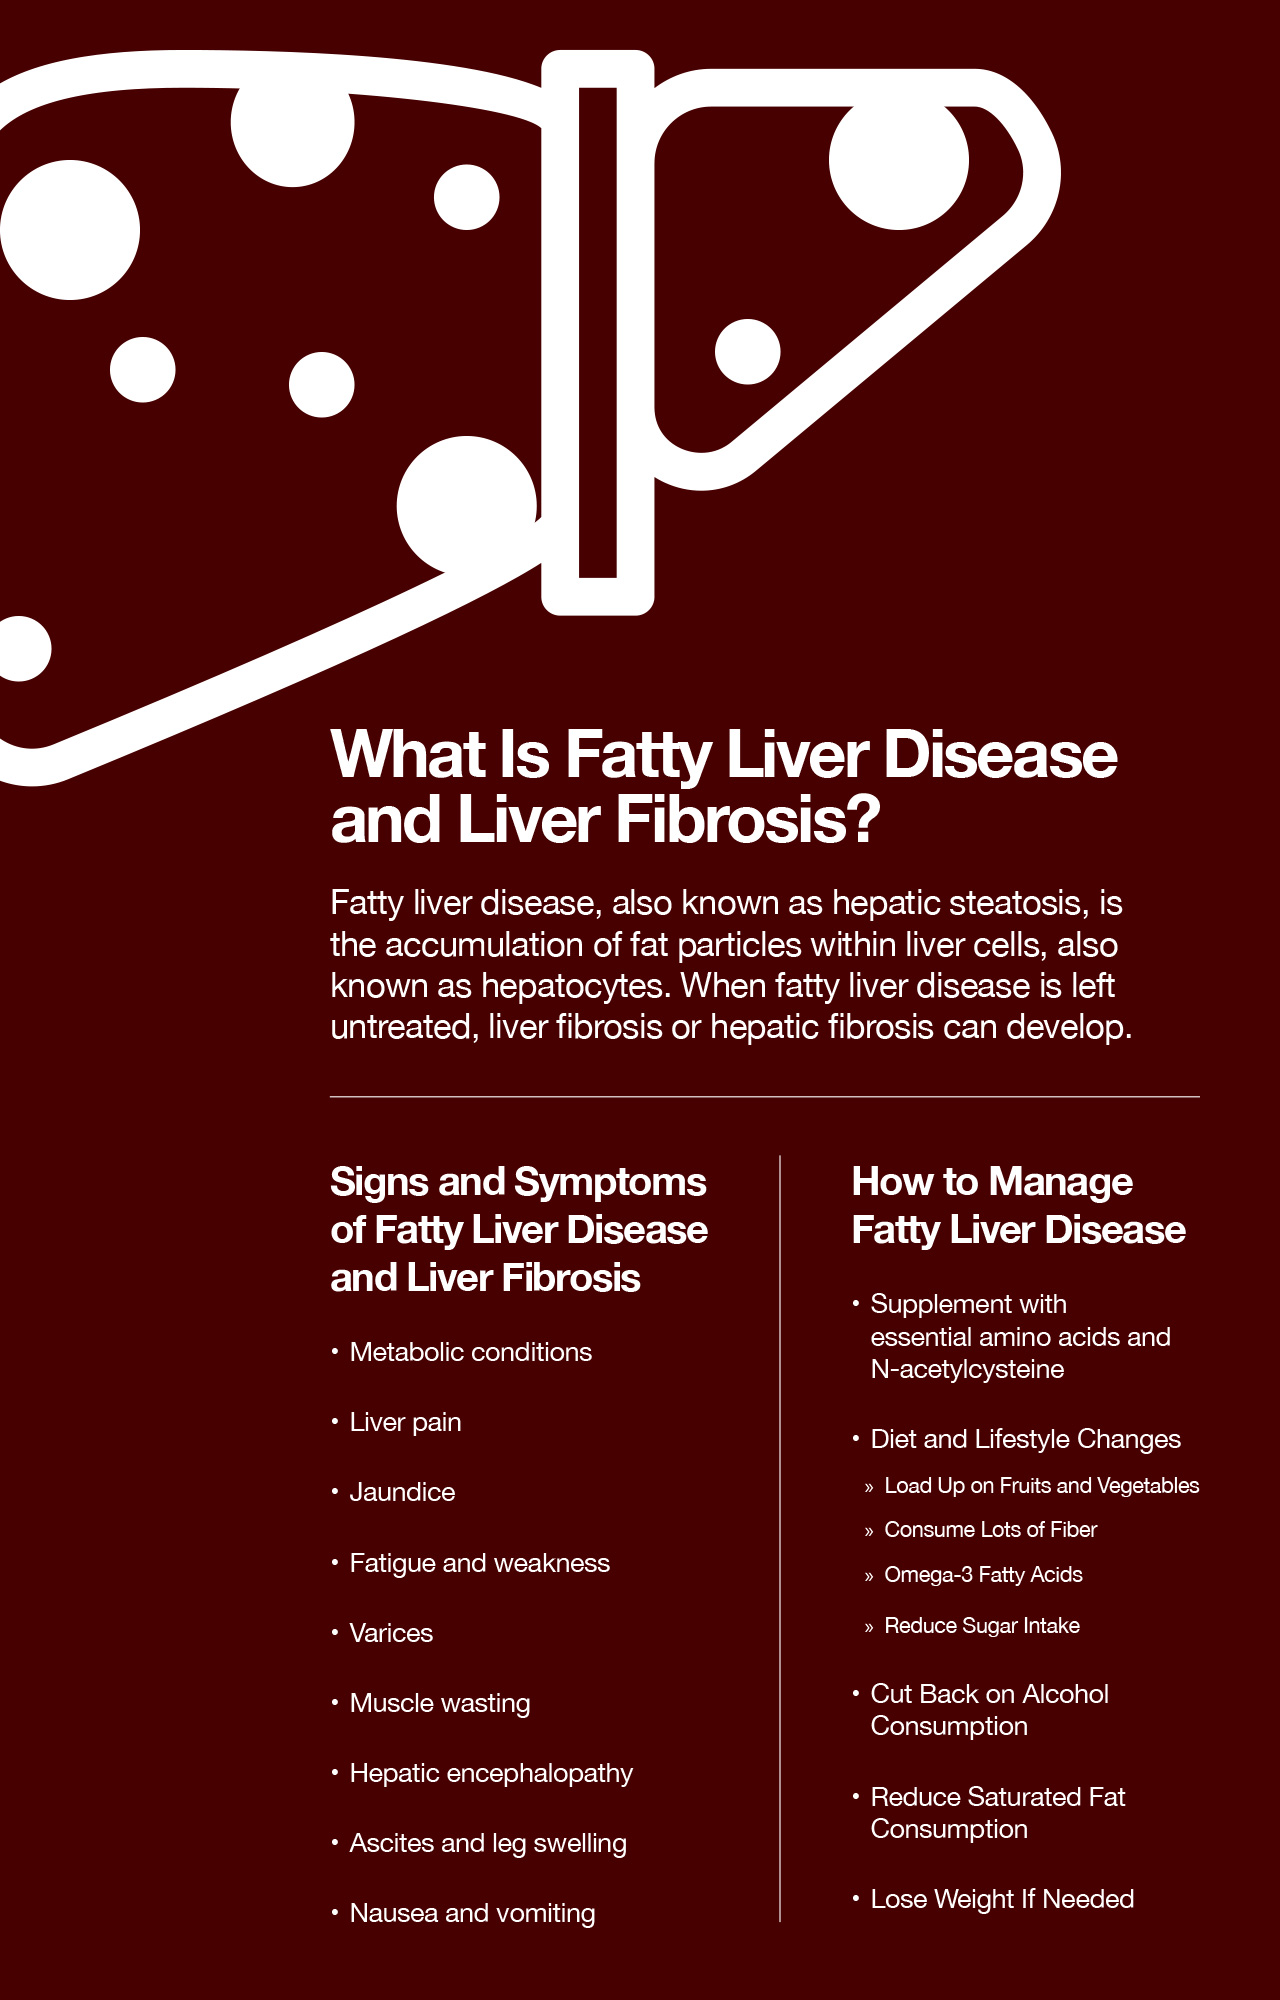 How to Manage Fatty Liver Disease